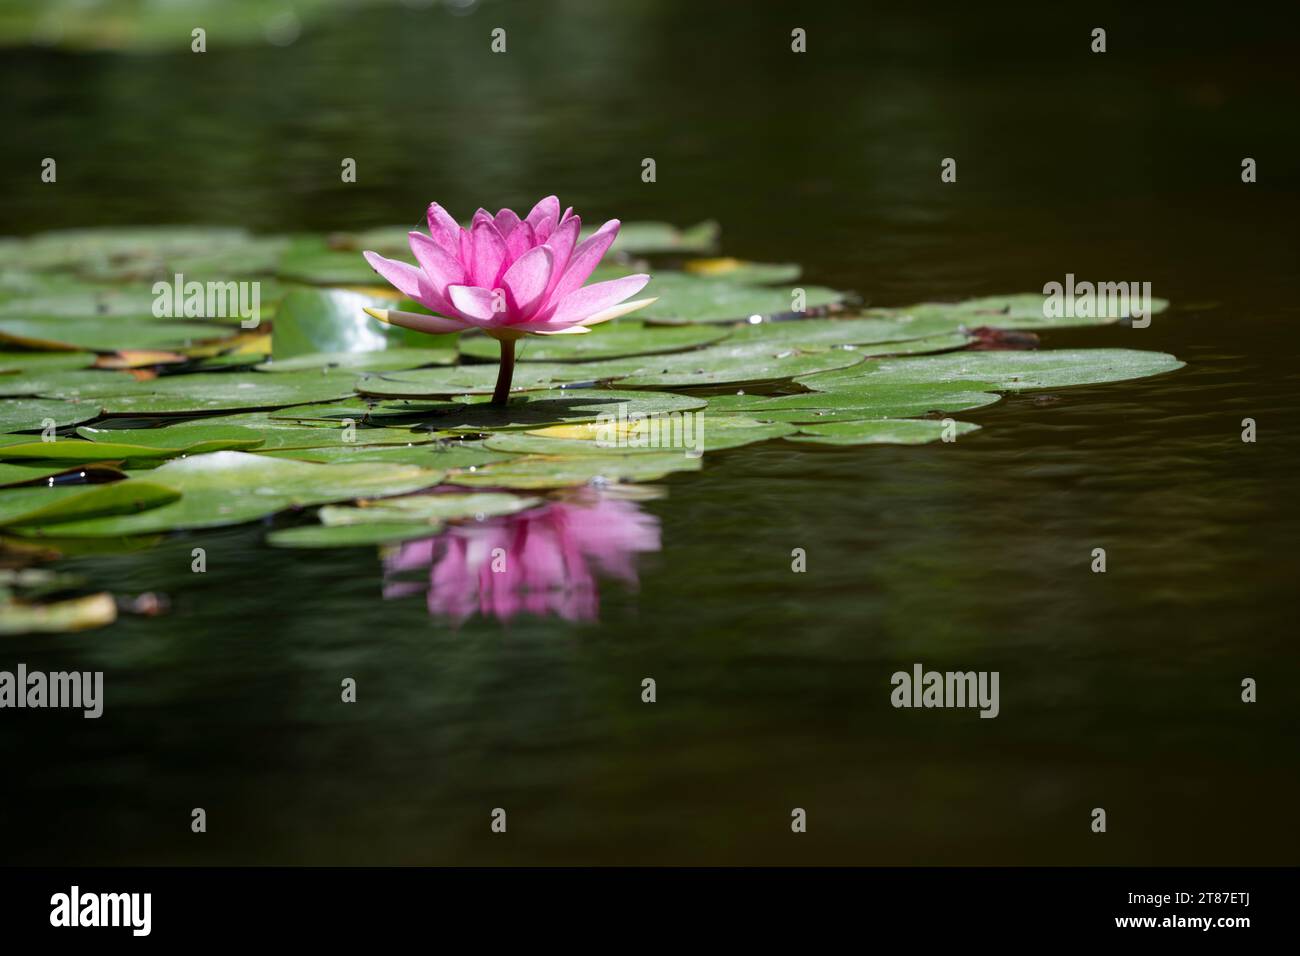 Detail shot of single pink water lily in small pond surrounded by green leaves Stock Photo